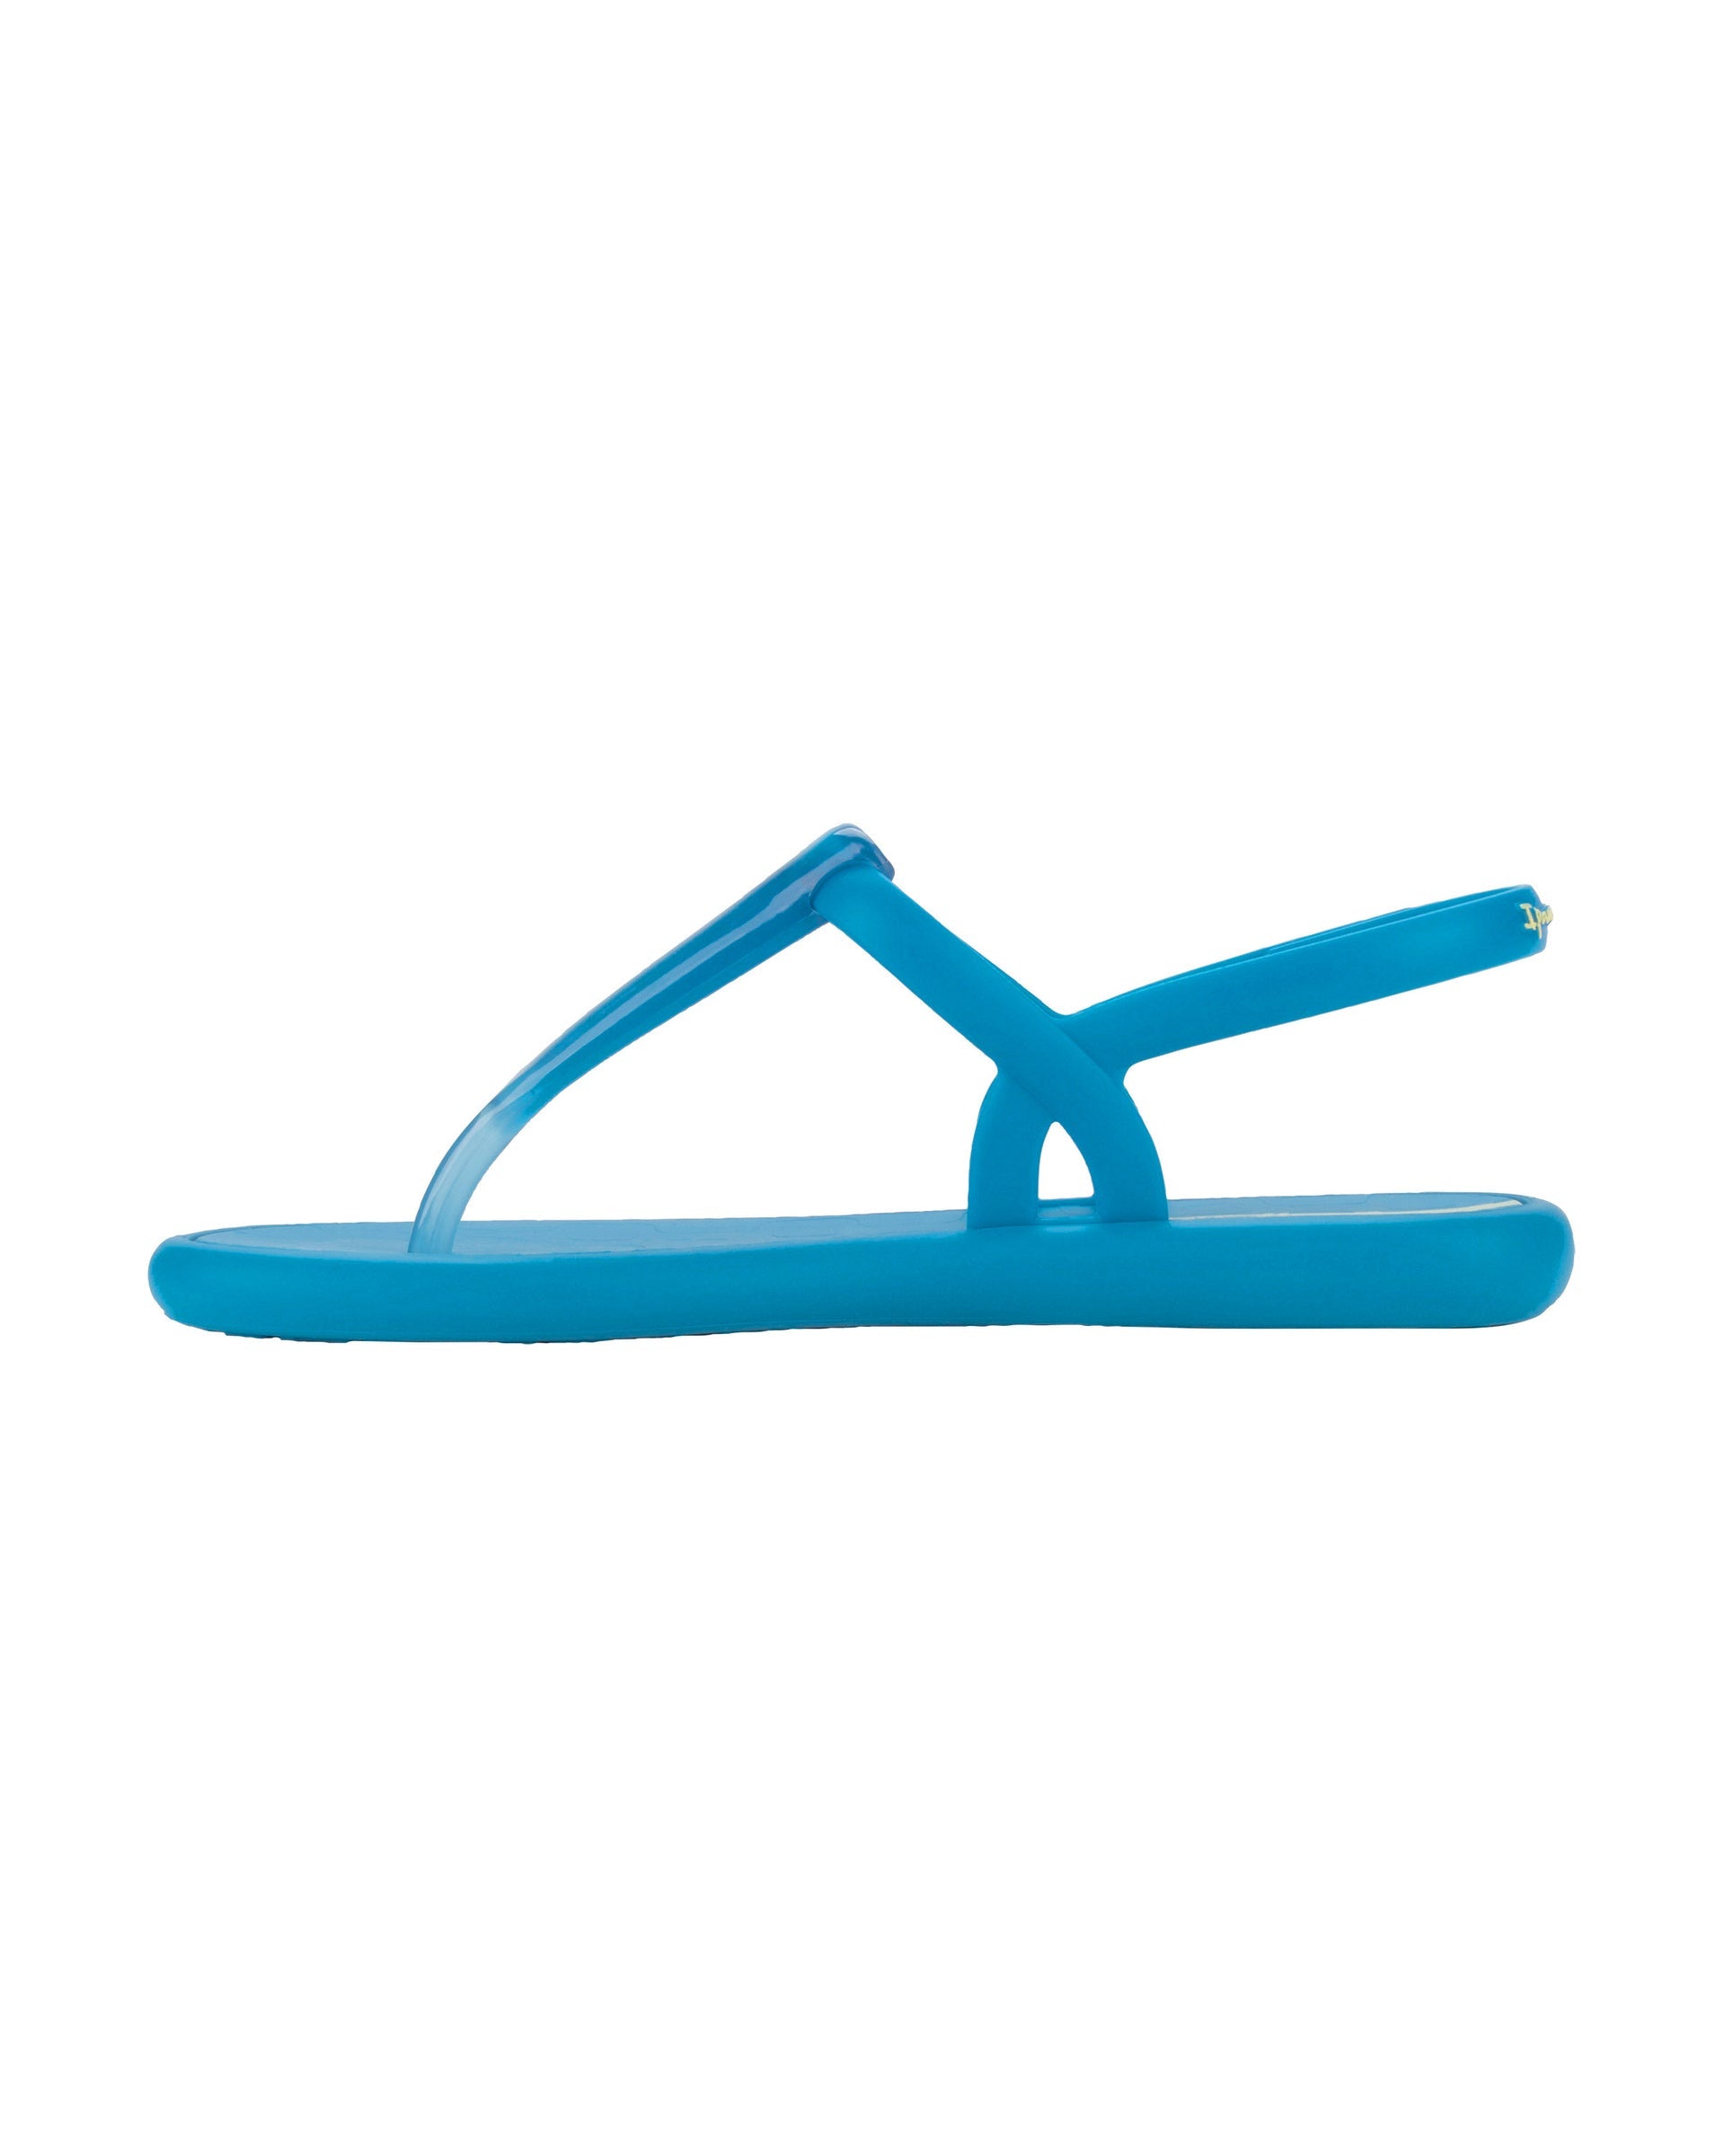 Inner side view of a blue Ipanema Glossy women's t-strap sandal.